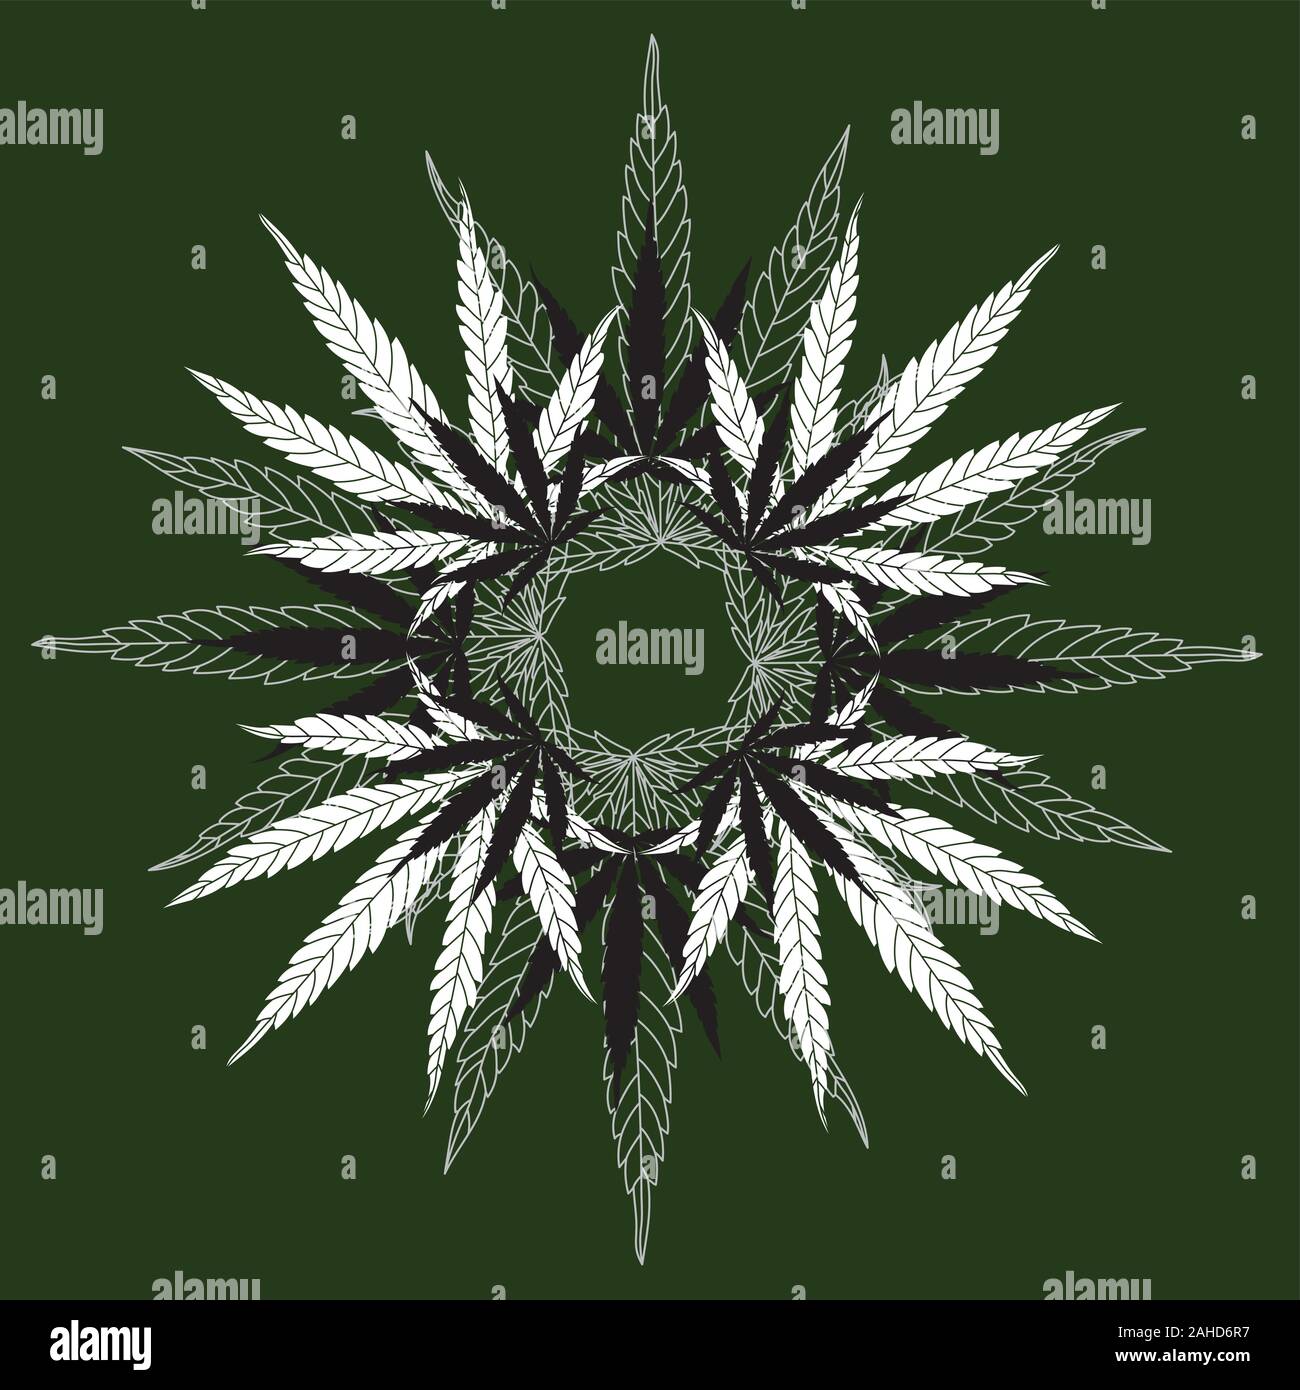 Detailed Hemp Leaf Mandala Wreath on Green Background. Vector Line Cannabis Leaves Drawing and Silhouettes Stock Vector